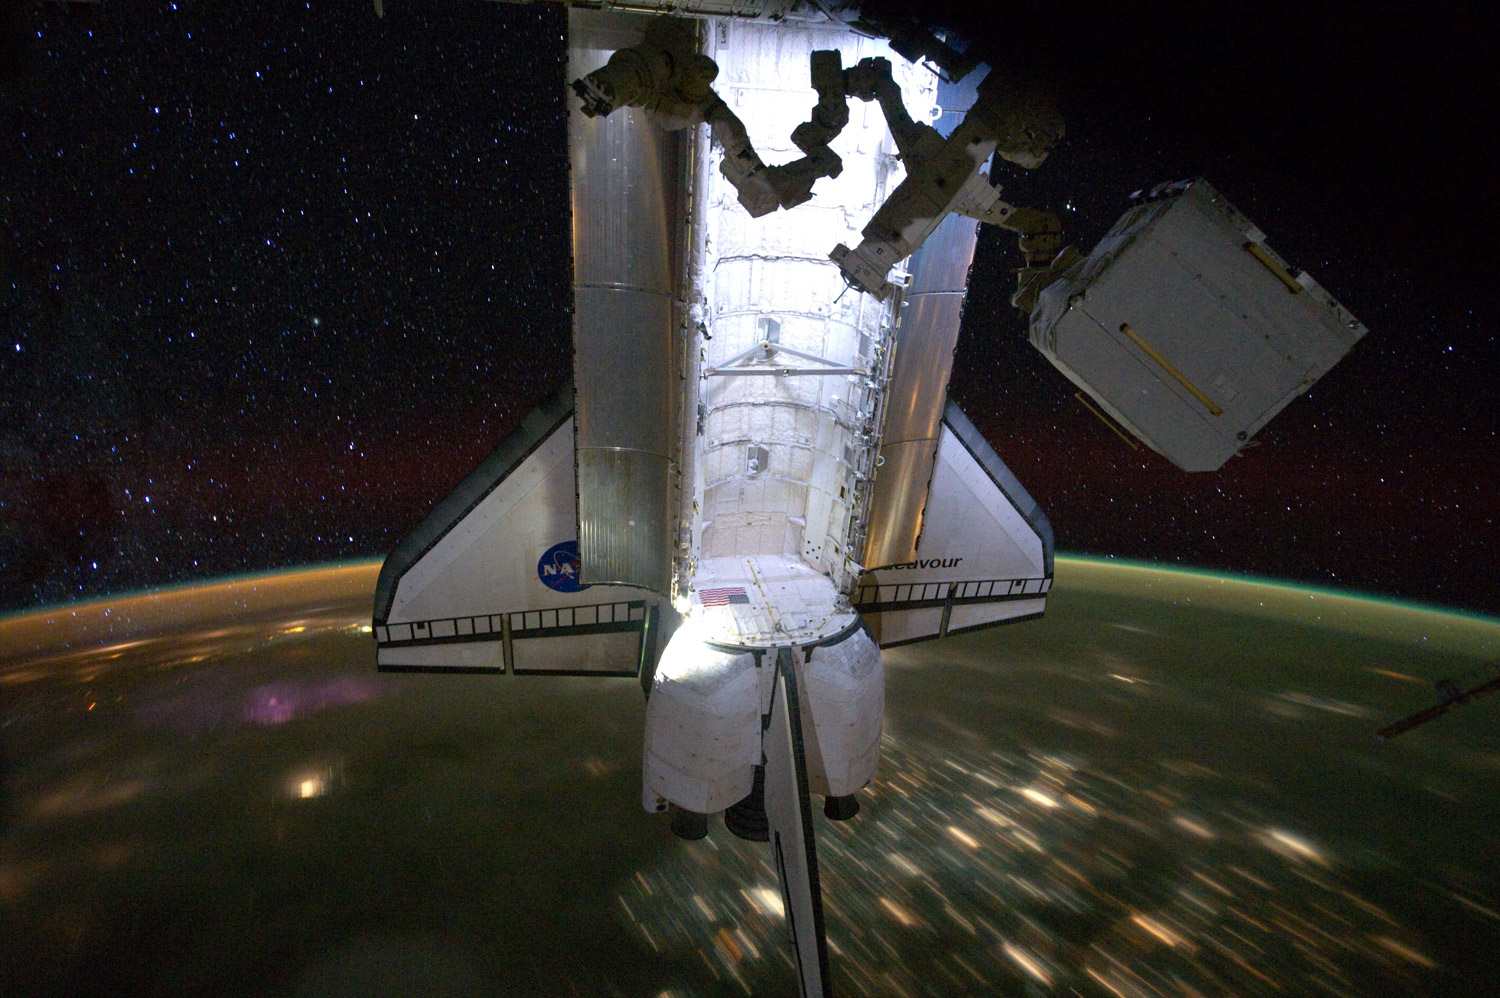 The space shuttle Endeavour docks at the International Space Station during its last mission, May 28, 2011.